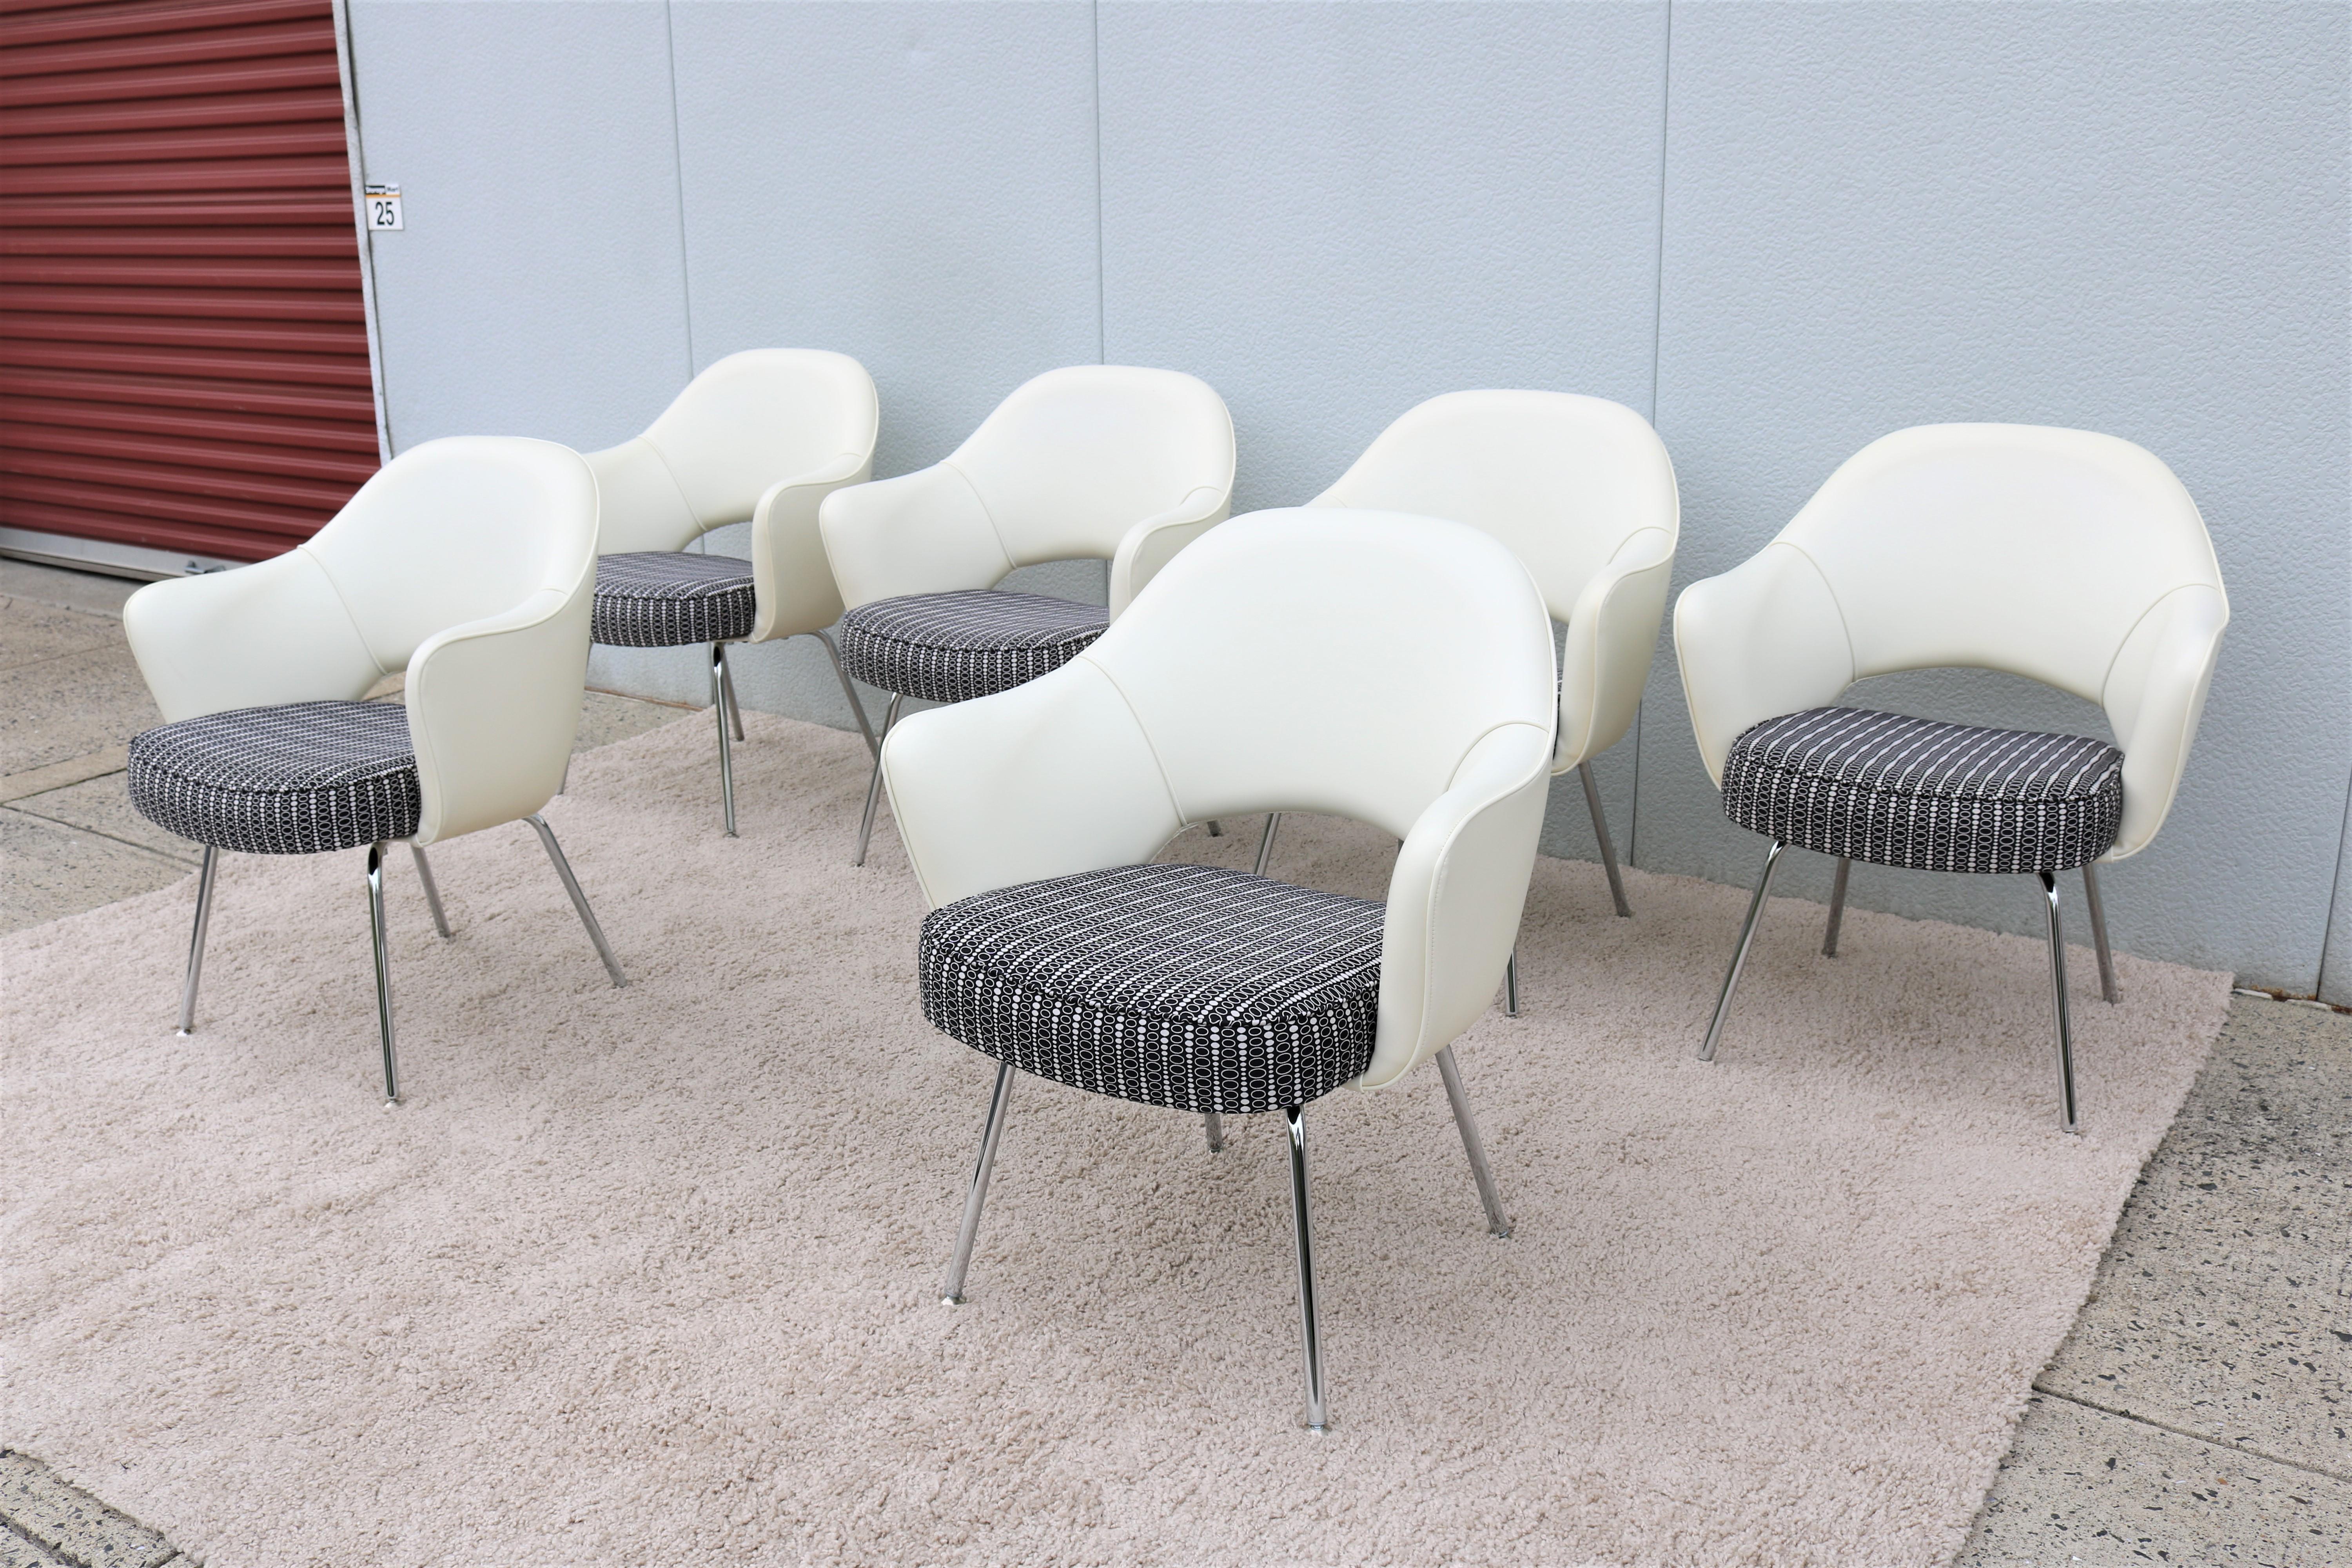 Stunning authentic Mid-Century Modern set of six Saarinen executive armchairs by Knoll.
One of Knoll most popular designs that achieved comfort through the shape of its shell.
Was introduced in 1950, a midcentury modern classic of the Eames